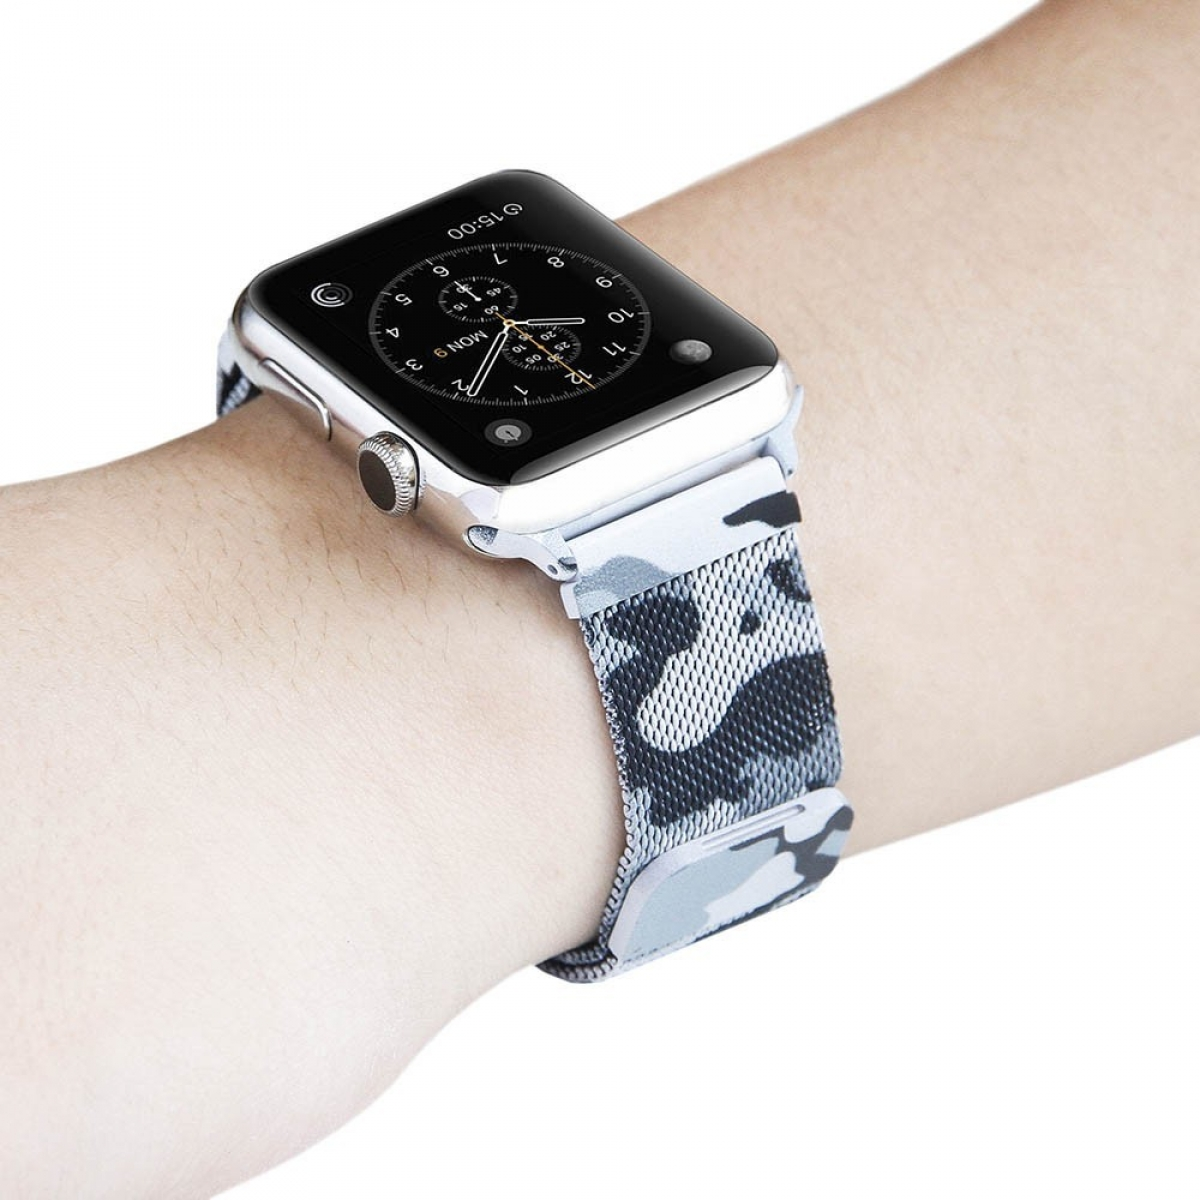 CASEONLINE Apple, Smartband, Watch Multicolor Milanaise 42mm, Camouflage,